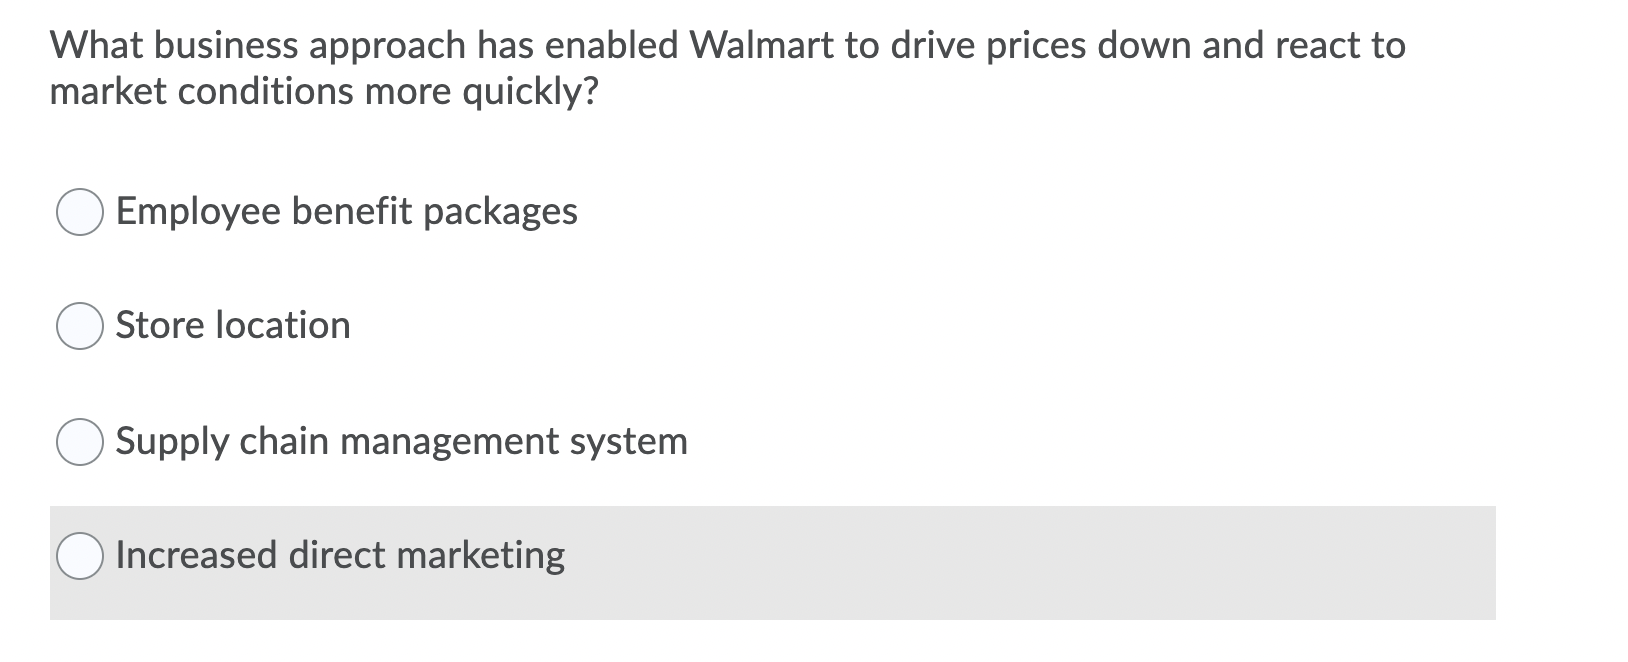 Walmart: 'We're out there asking suppliers even now, do any of you want to  … take prices down while prices are going up to gain market share